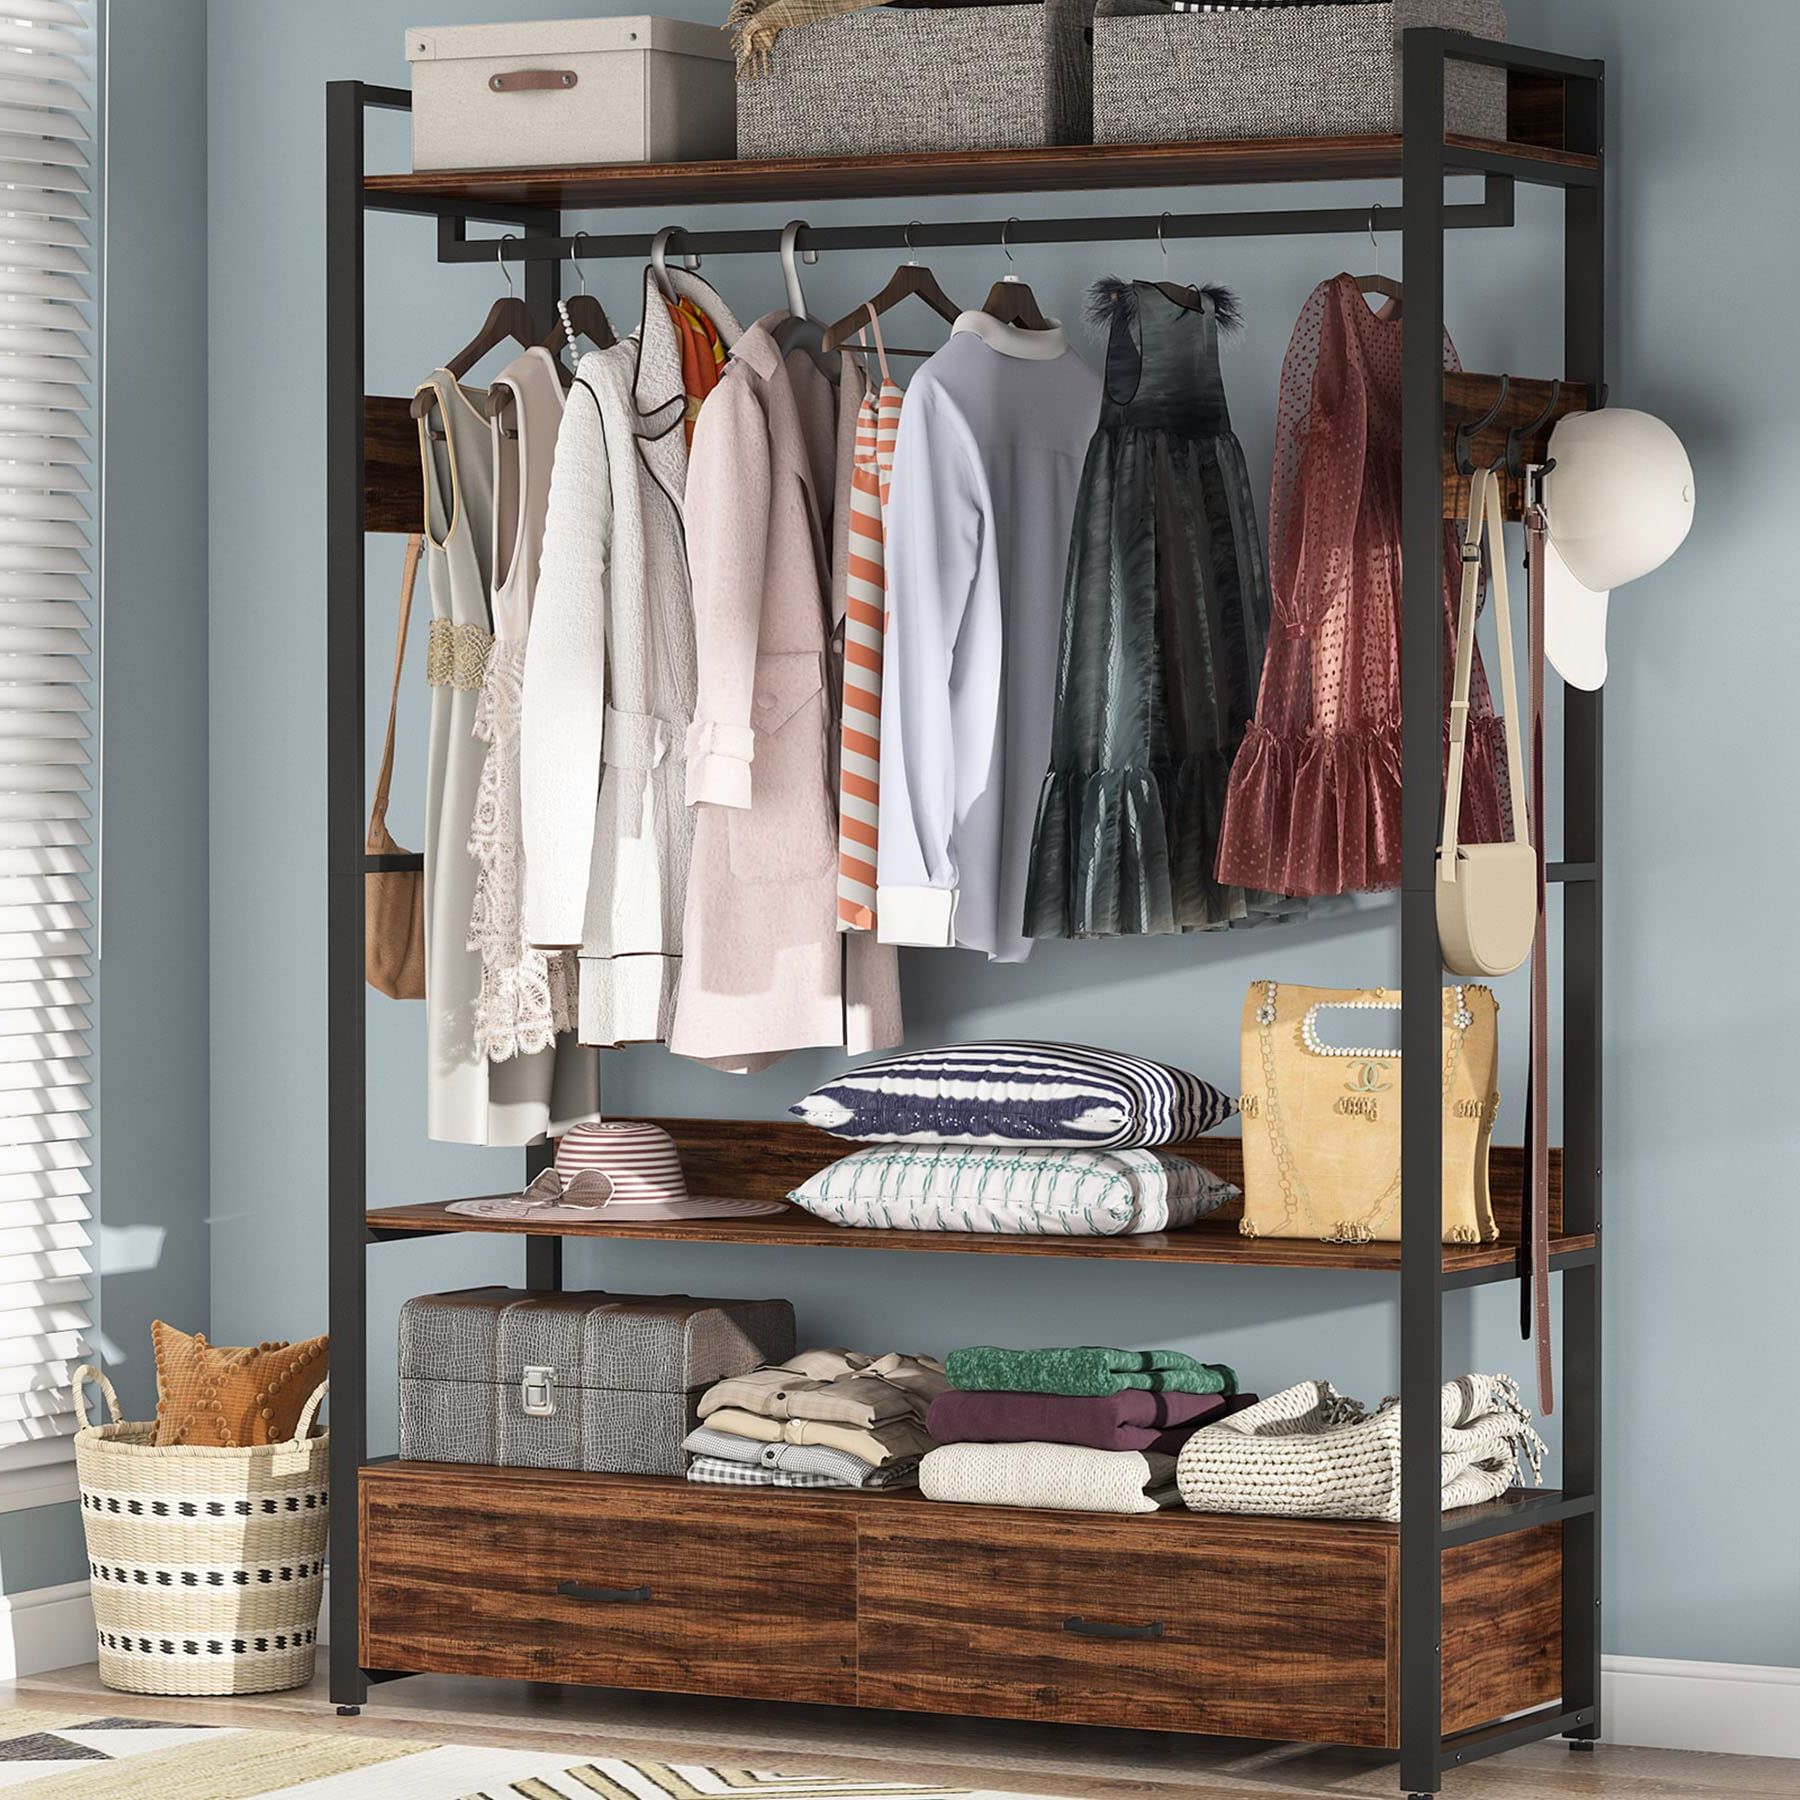 Clothes Rack Wardrobes Intended For Famous Amazon: Tribesigns Freestanding Clothes Rack Shelves, Closet Organizer  With Shelves Drawers And Hooks, Heavy Duty Garment Clothing Wardrobe  Storage Shelving With Hanging Rod, Rustic : Home & Kitchen (Photo 3 of 10)